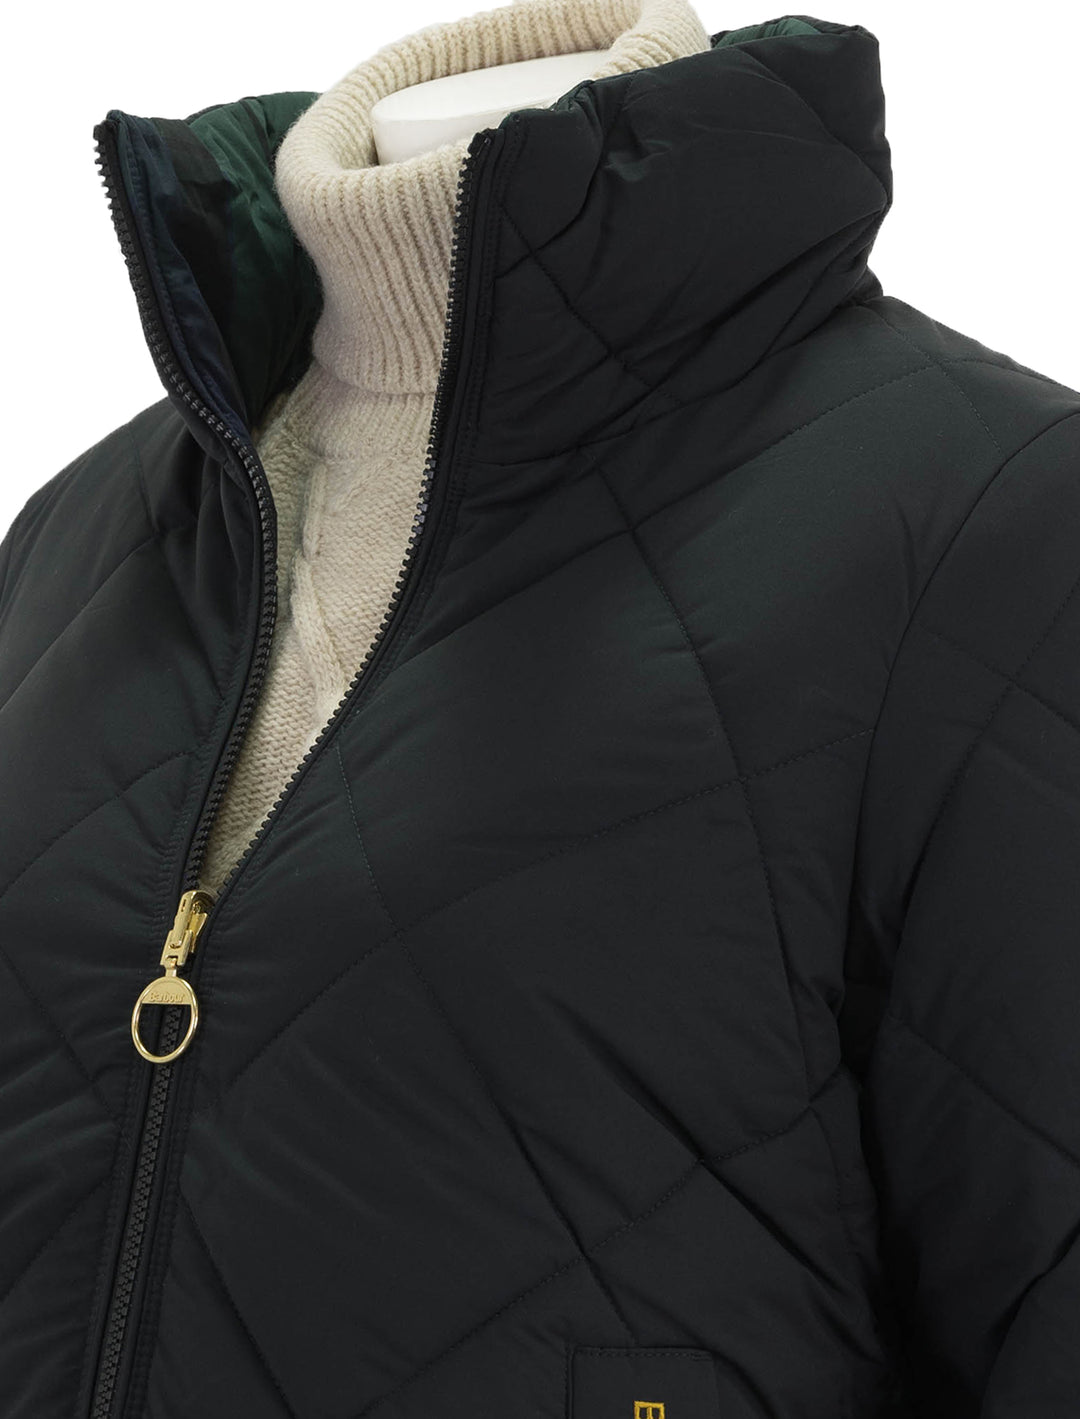 Close-up view of Barbour's reversible hudswell quilt jacket in black.